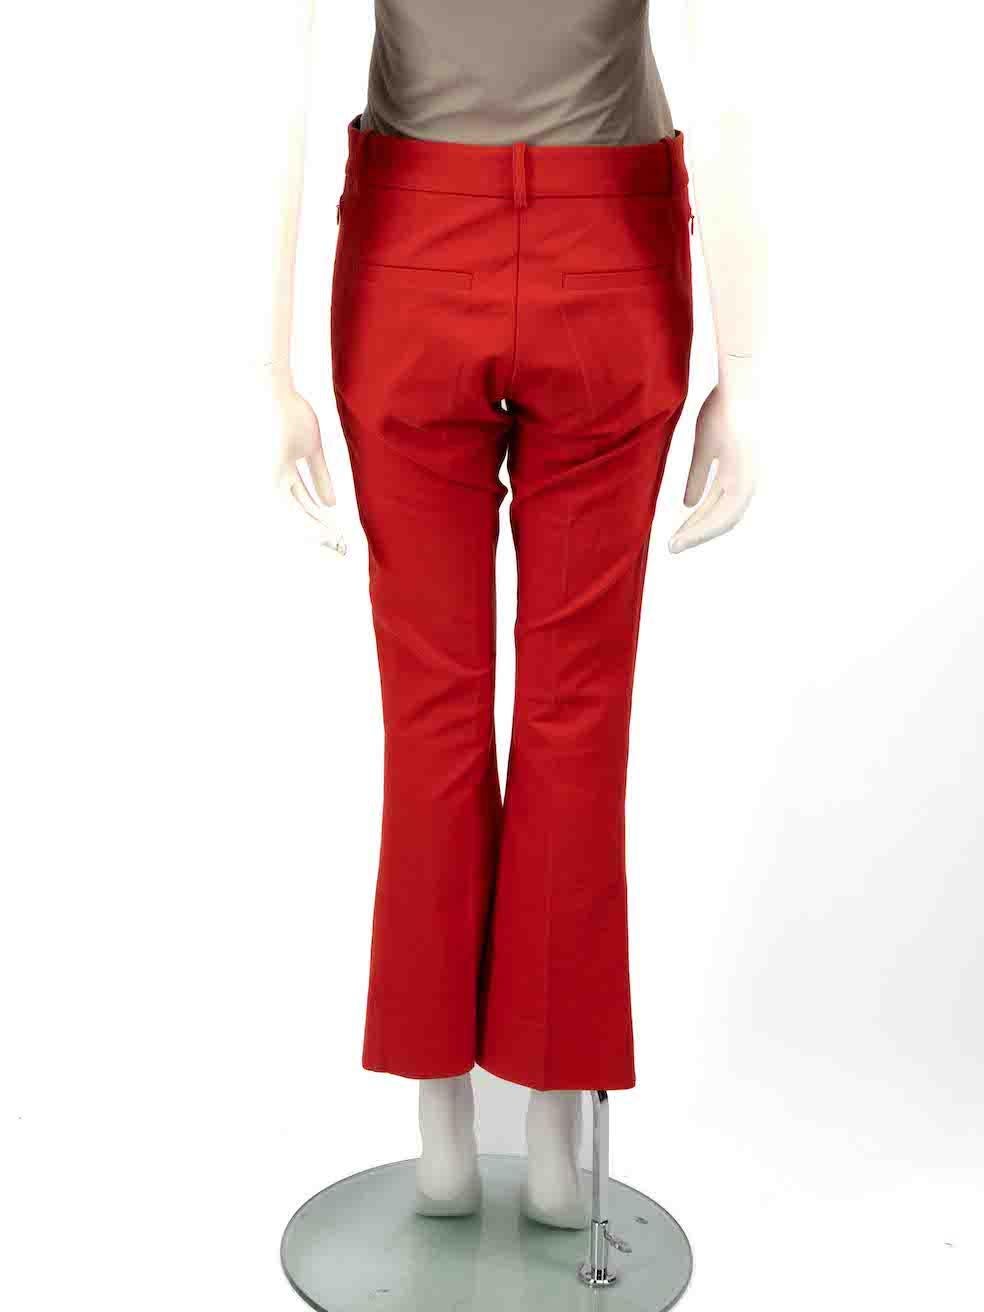 Derek Lam Derek Lam 10 Crosby Red Flared Leg Trousers Size S In Good Condition For Sale In London, GB